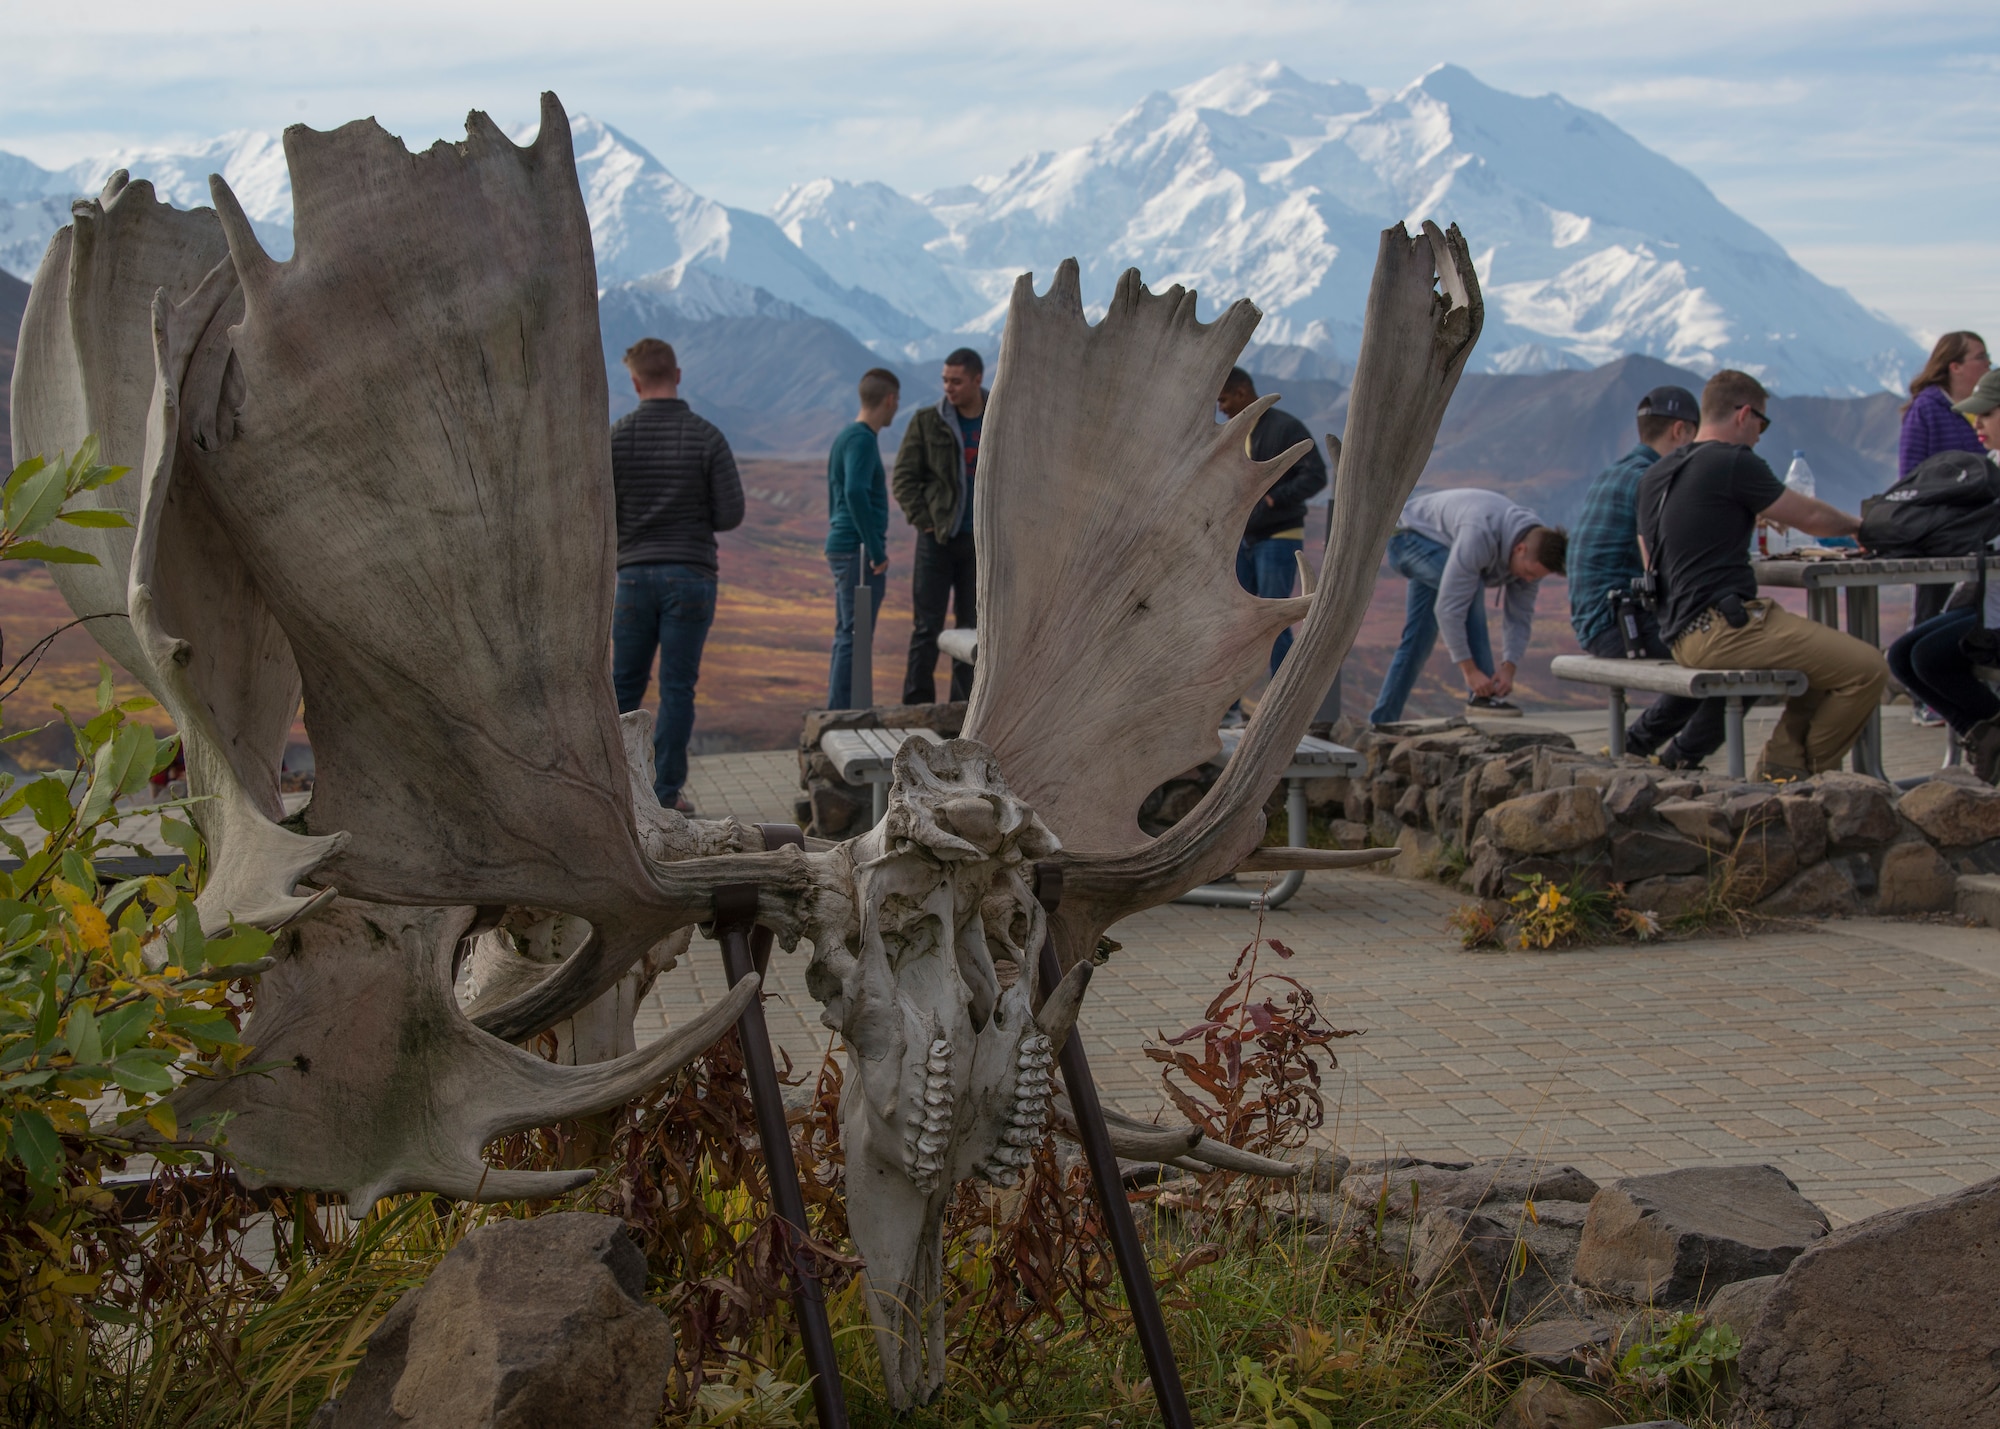 Alaska-based service members discover the Eielson Visitor’s Center area during Military Appreciation Day at Mile 66, Denali National Park and Preserve, Alaska, Sept. 15, 2018. This was the 11th annual Military Appreciation Day which included 400 “road lottery” tickets given out to Alaskan based military members. The Eielson Bluffs area has always been famous for its amazing views of Denali on clear days, and it is not uncommon to see wildlife on the surrounding hillsides.